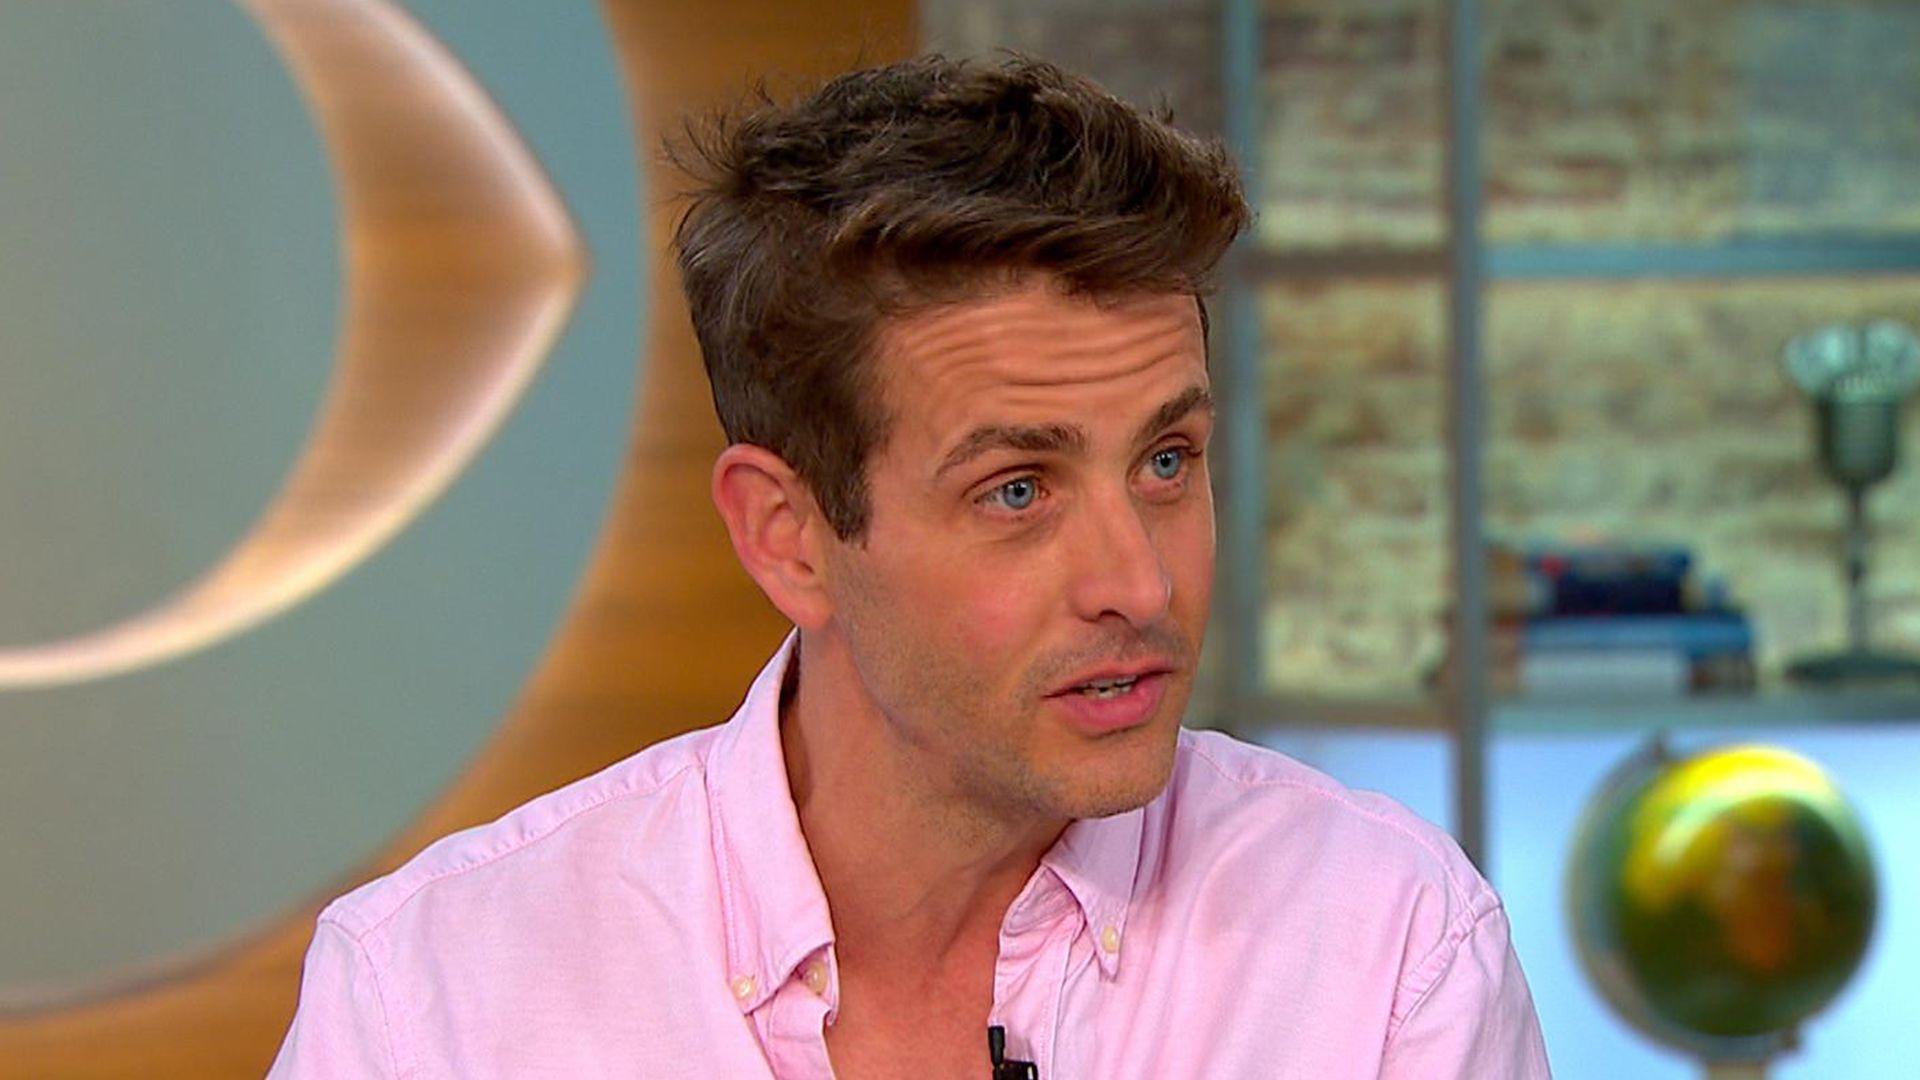 Watch CBS This Morning: NKOTB's Joey McIntyre on new show